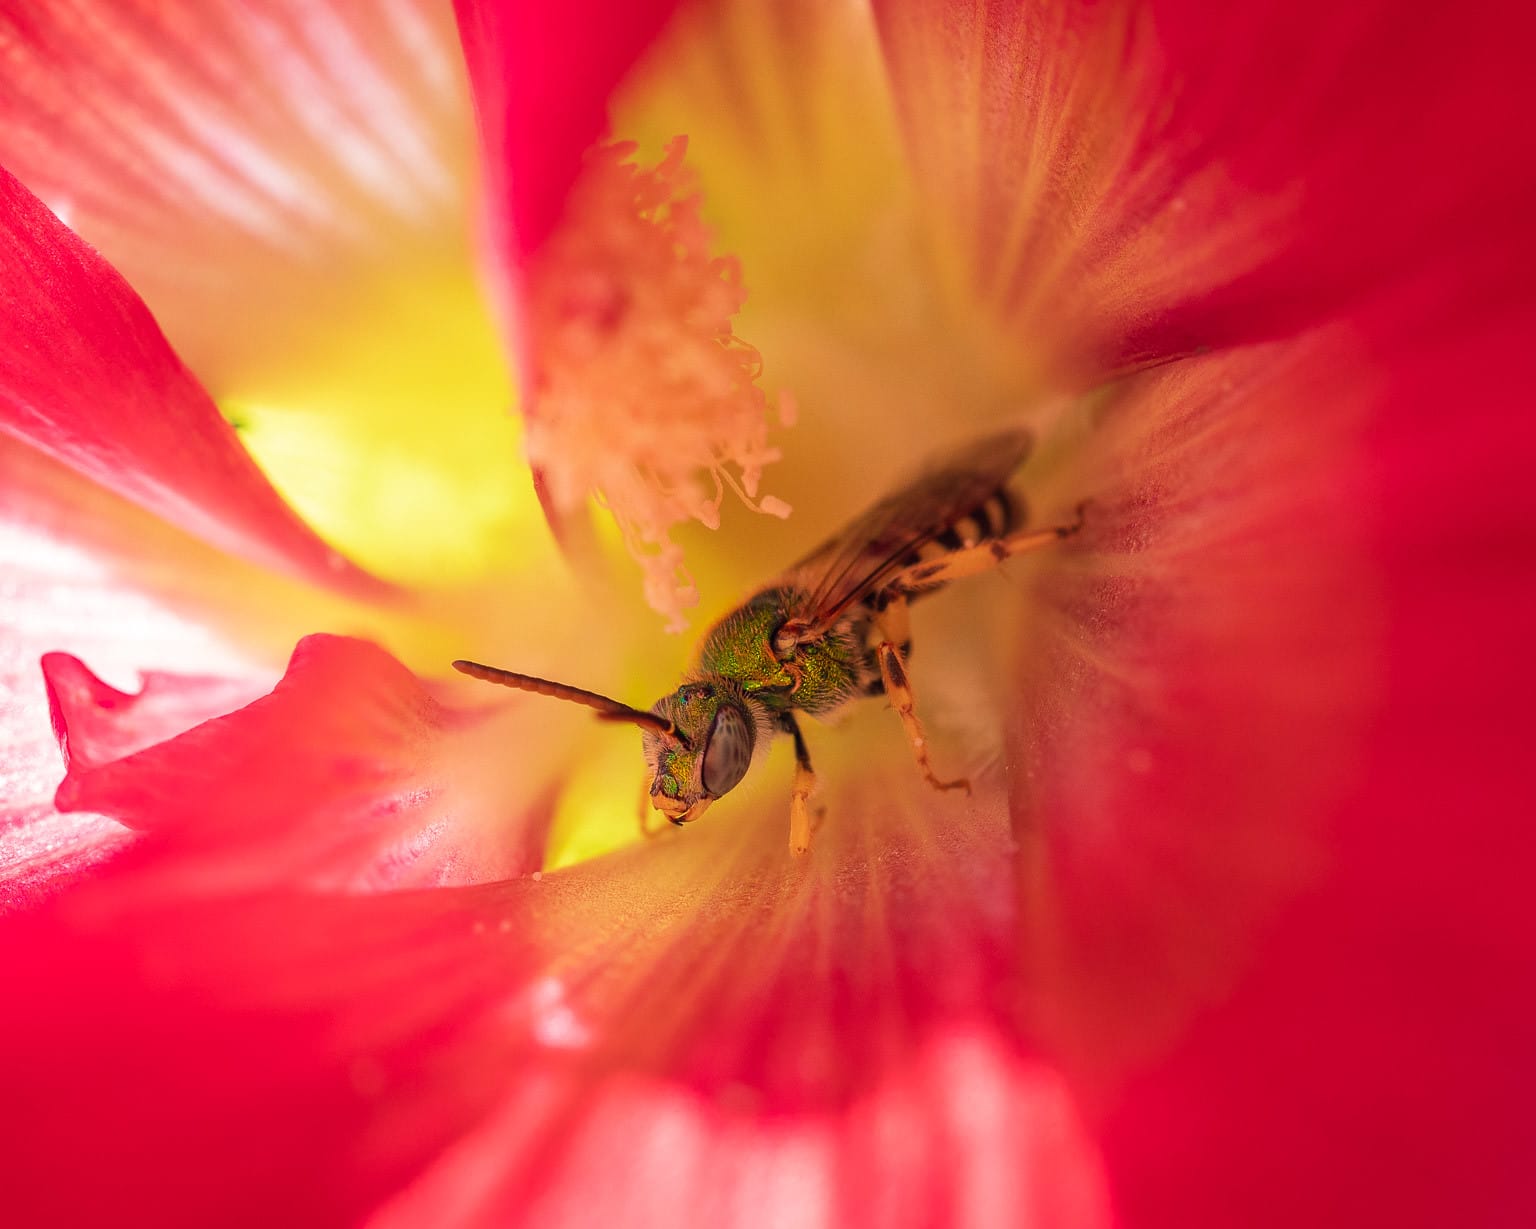 Solitary Bees are First-Class Pollinators